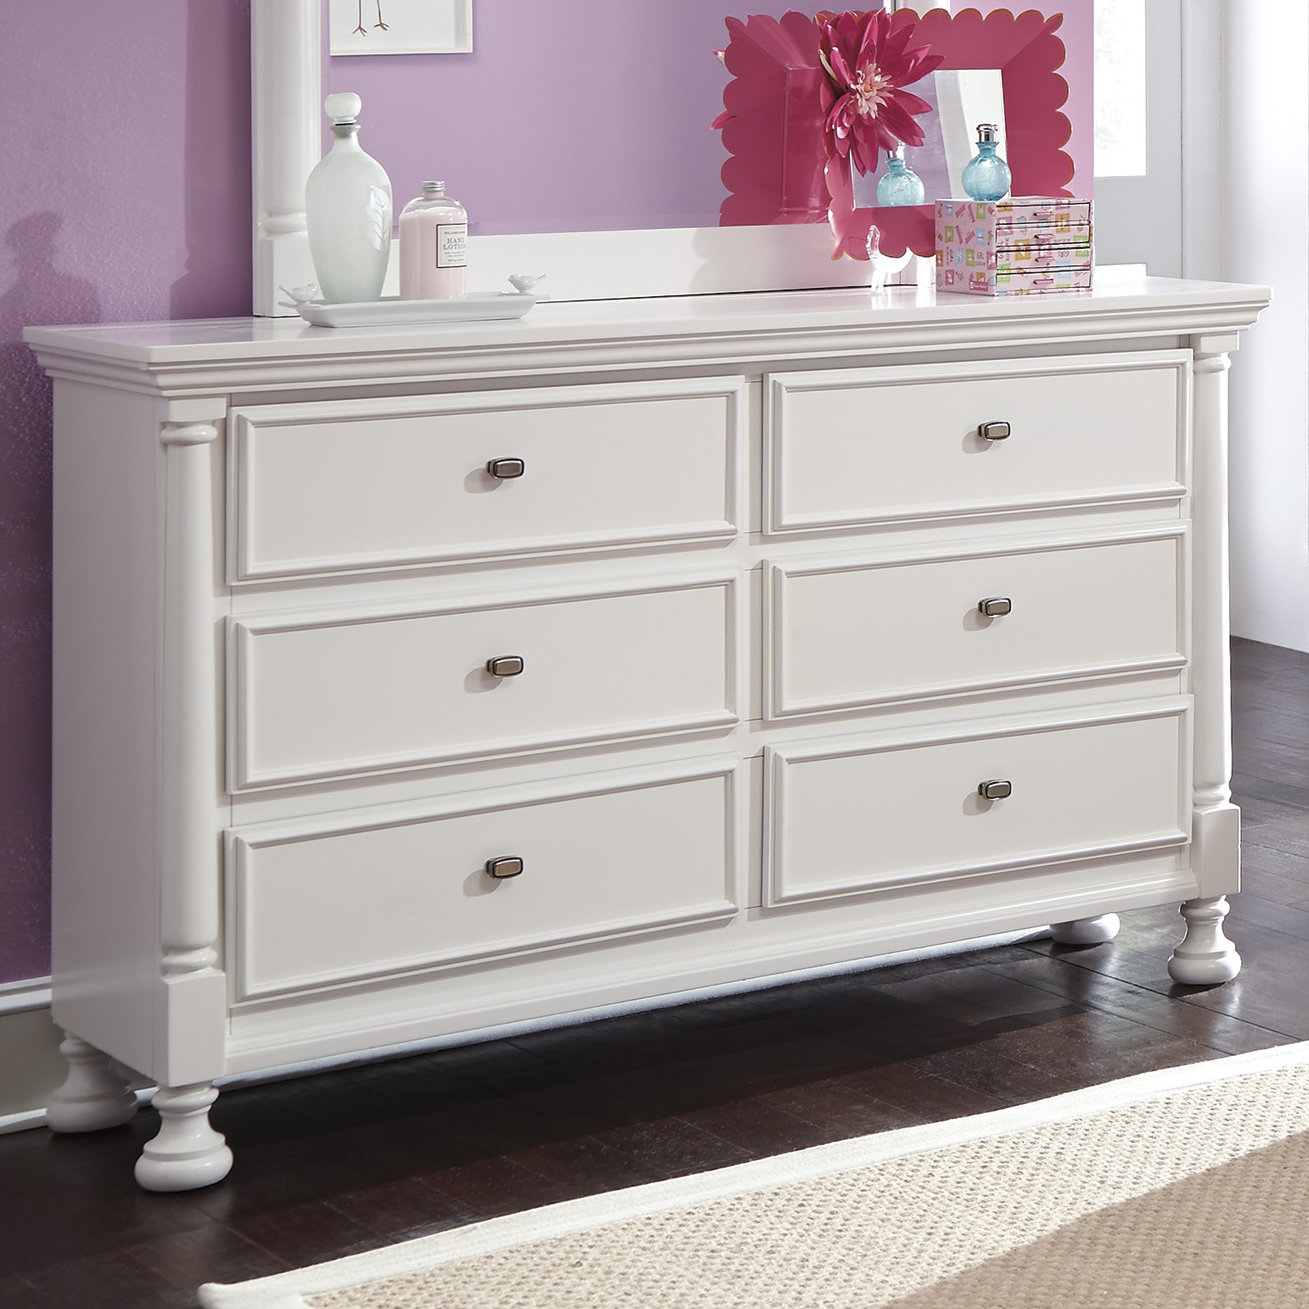 Darby Home Co Jeffersonville 6 Drawer Double Dresser Reviews